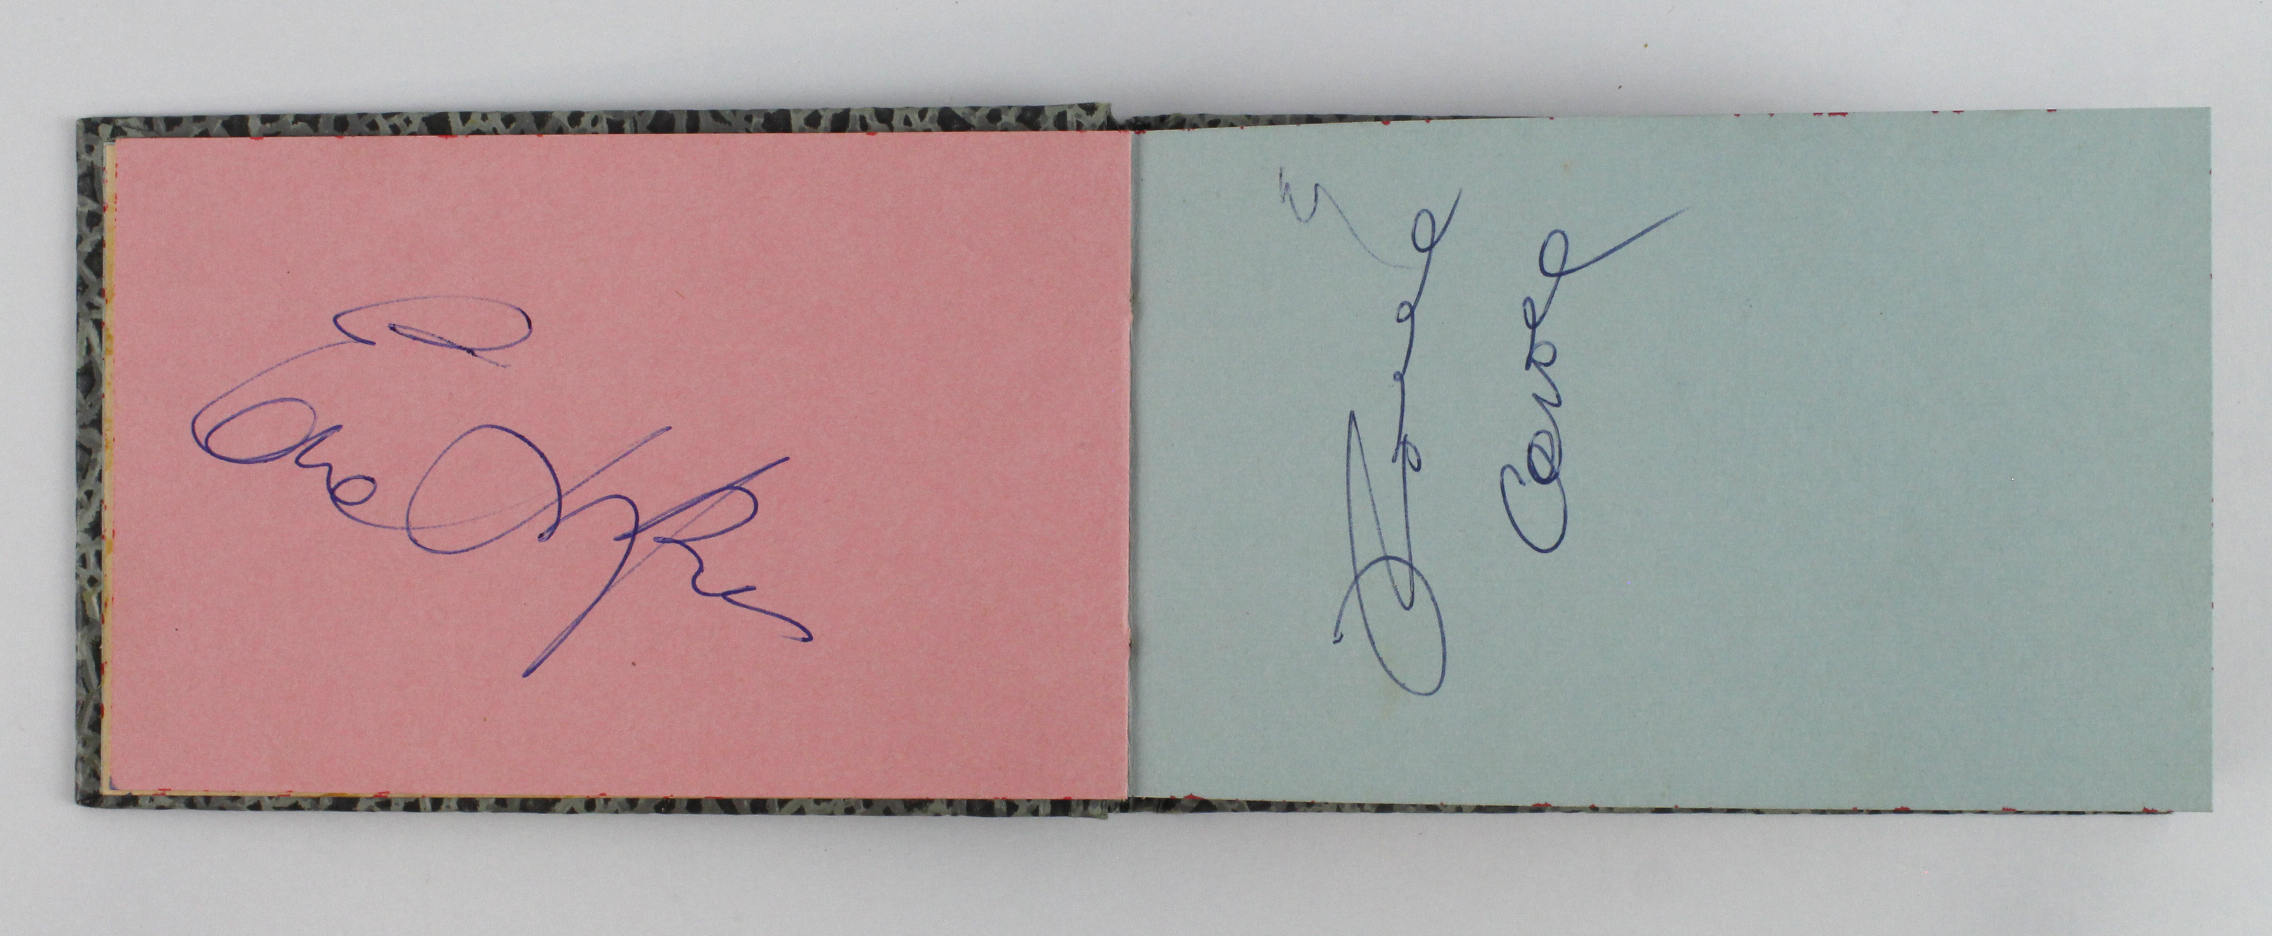 Rolling Stones. An autograph album containing signatures of all five members of the Rolling